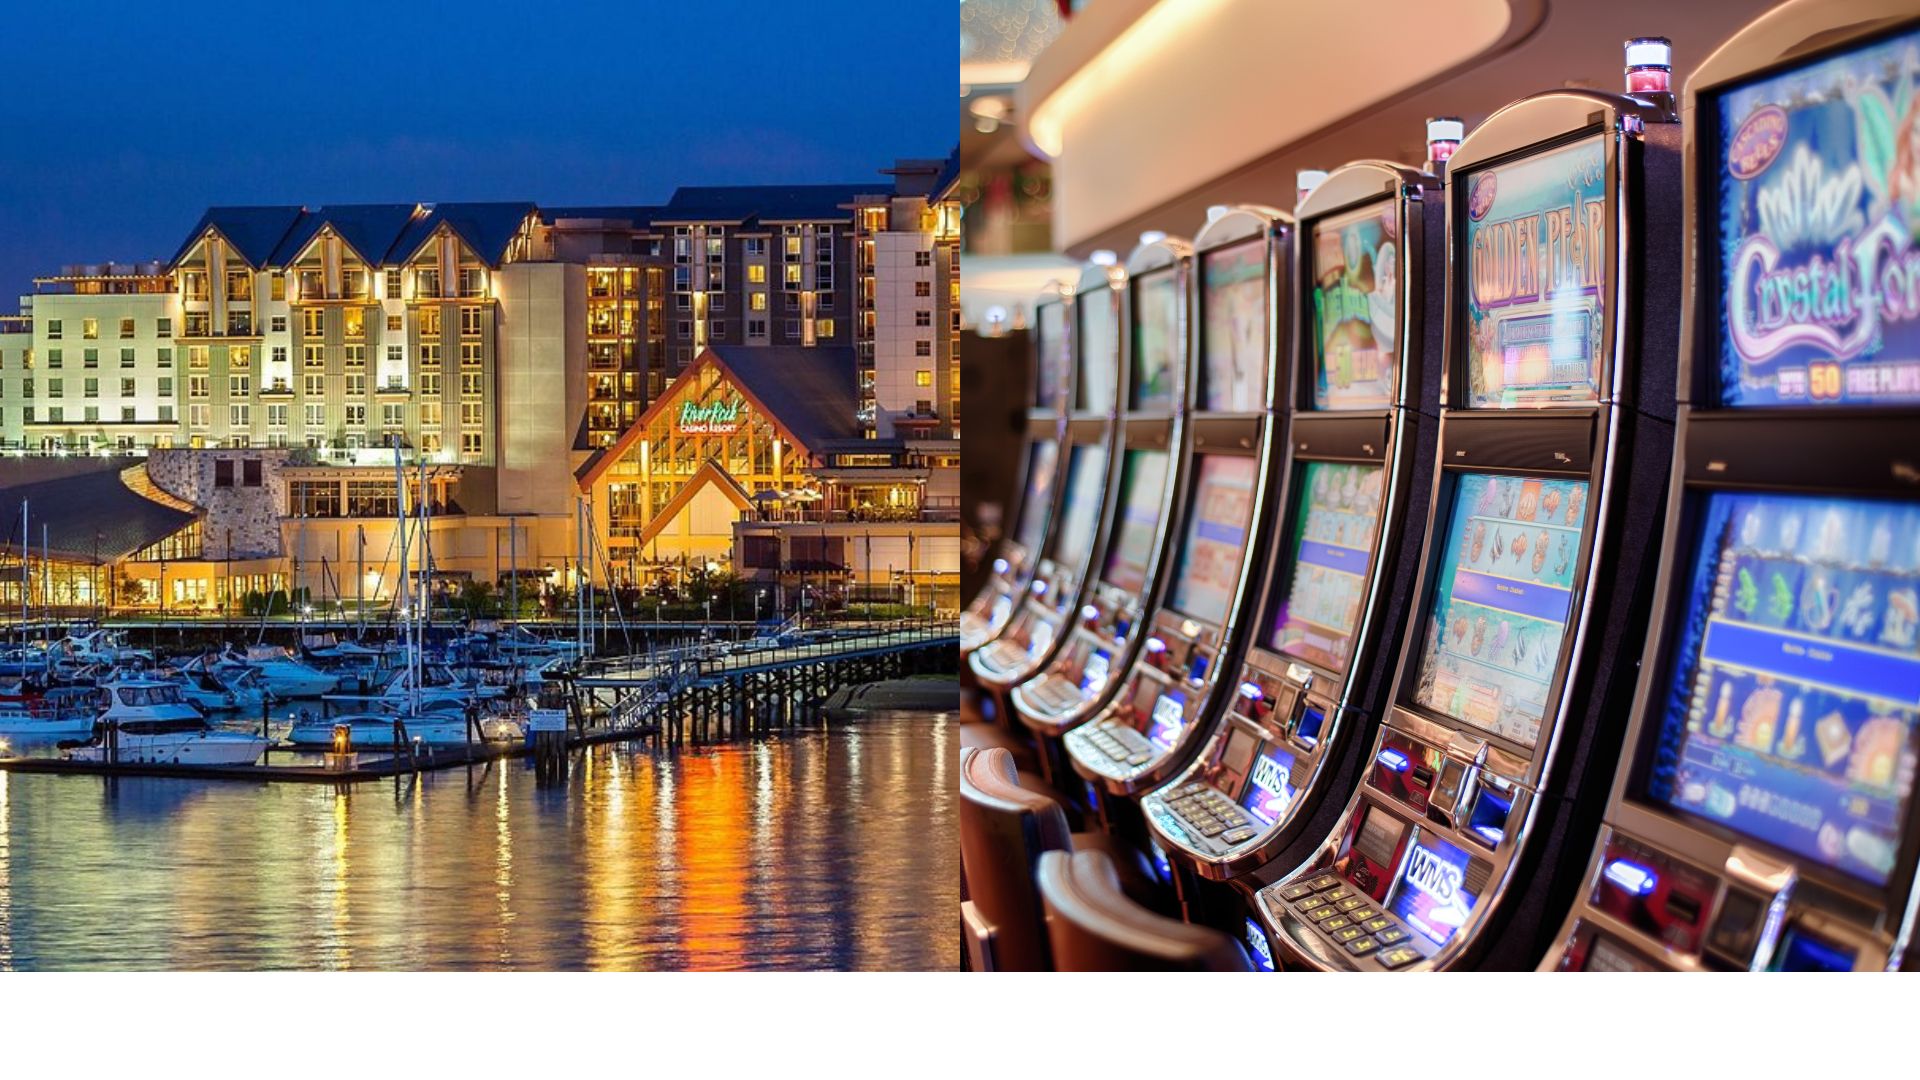 hotels & Casino is one of the industries where Eazy Return Provides pickup services